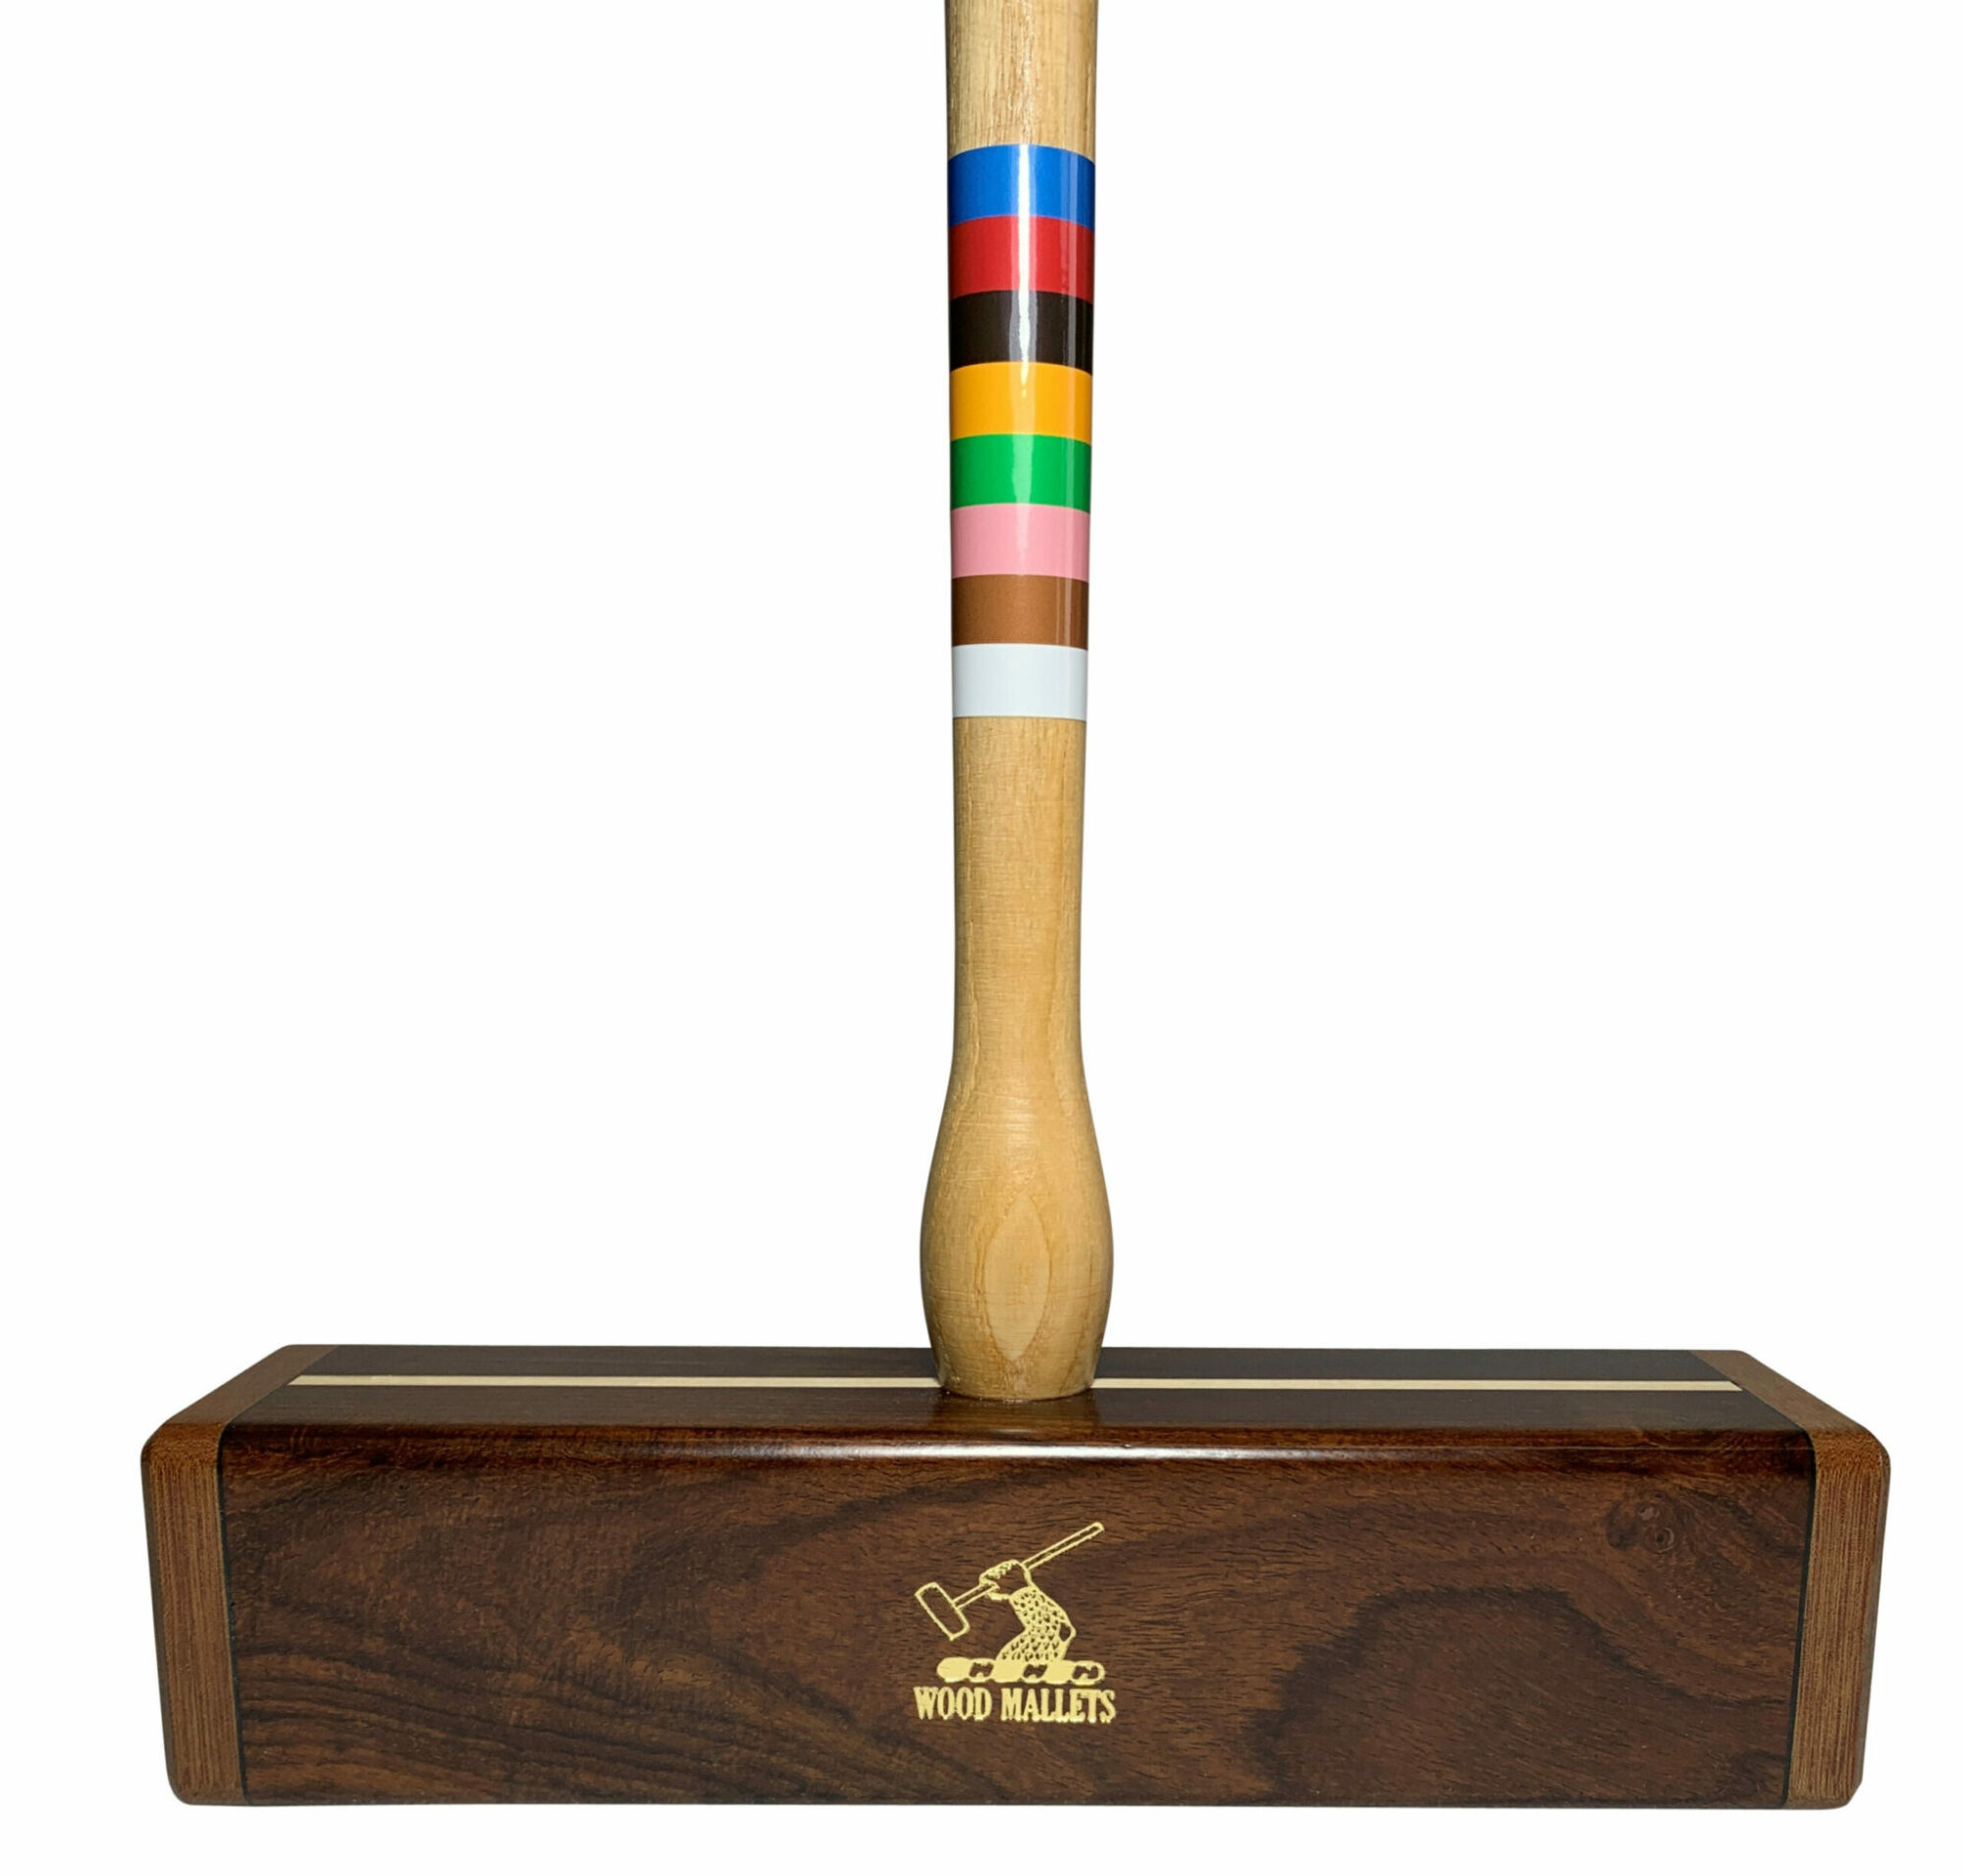 The Perfect Croquet Mallet The Wills Croquet Company Hand-crafted Rosewood 